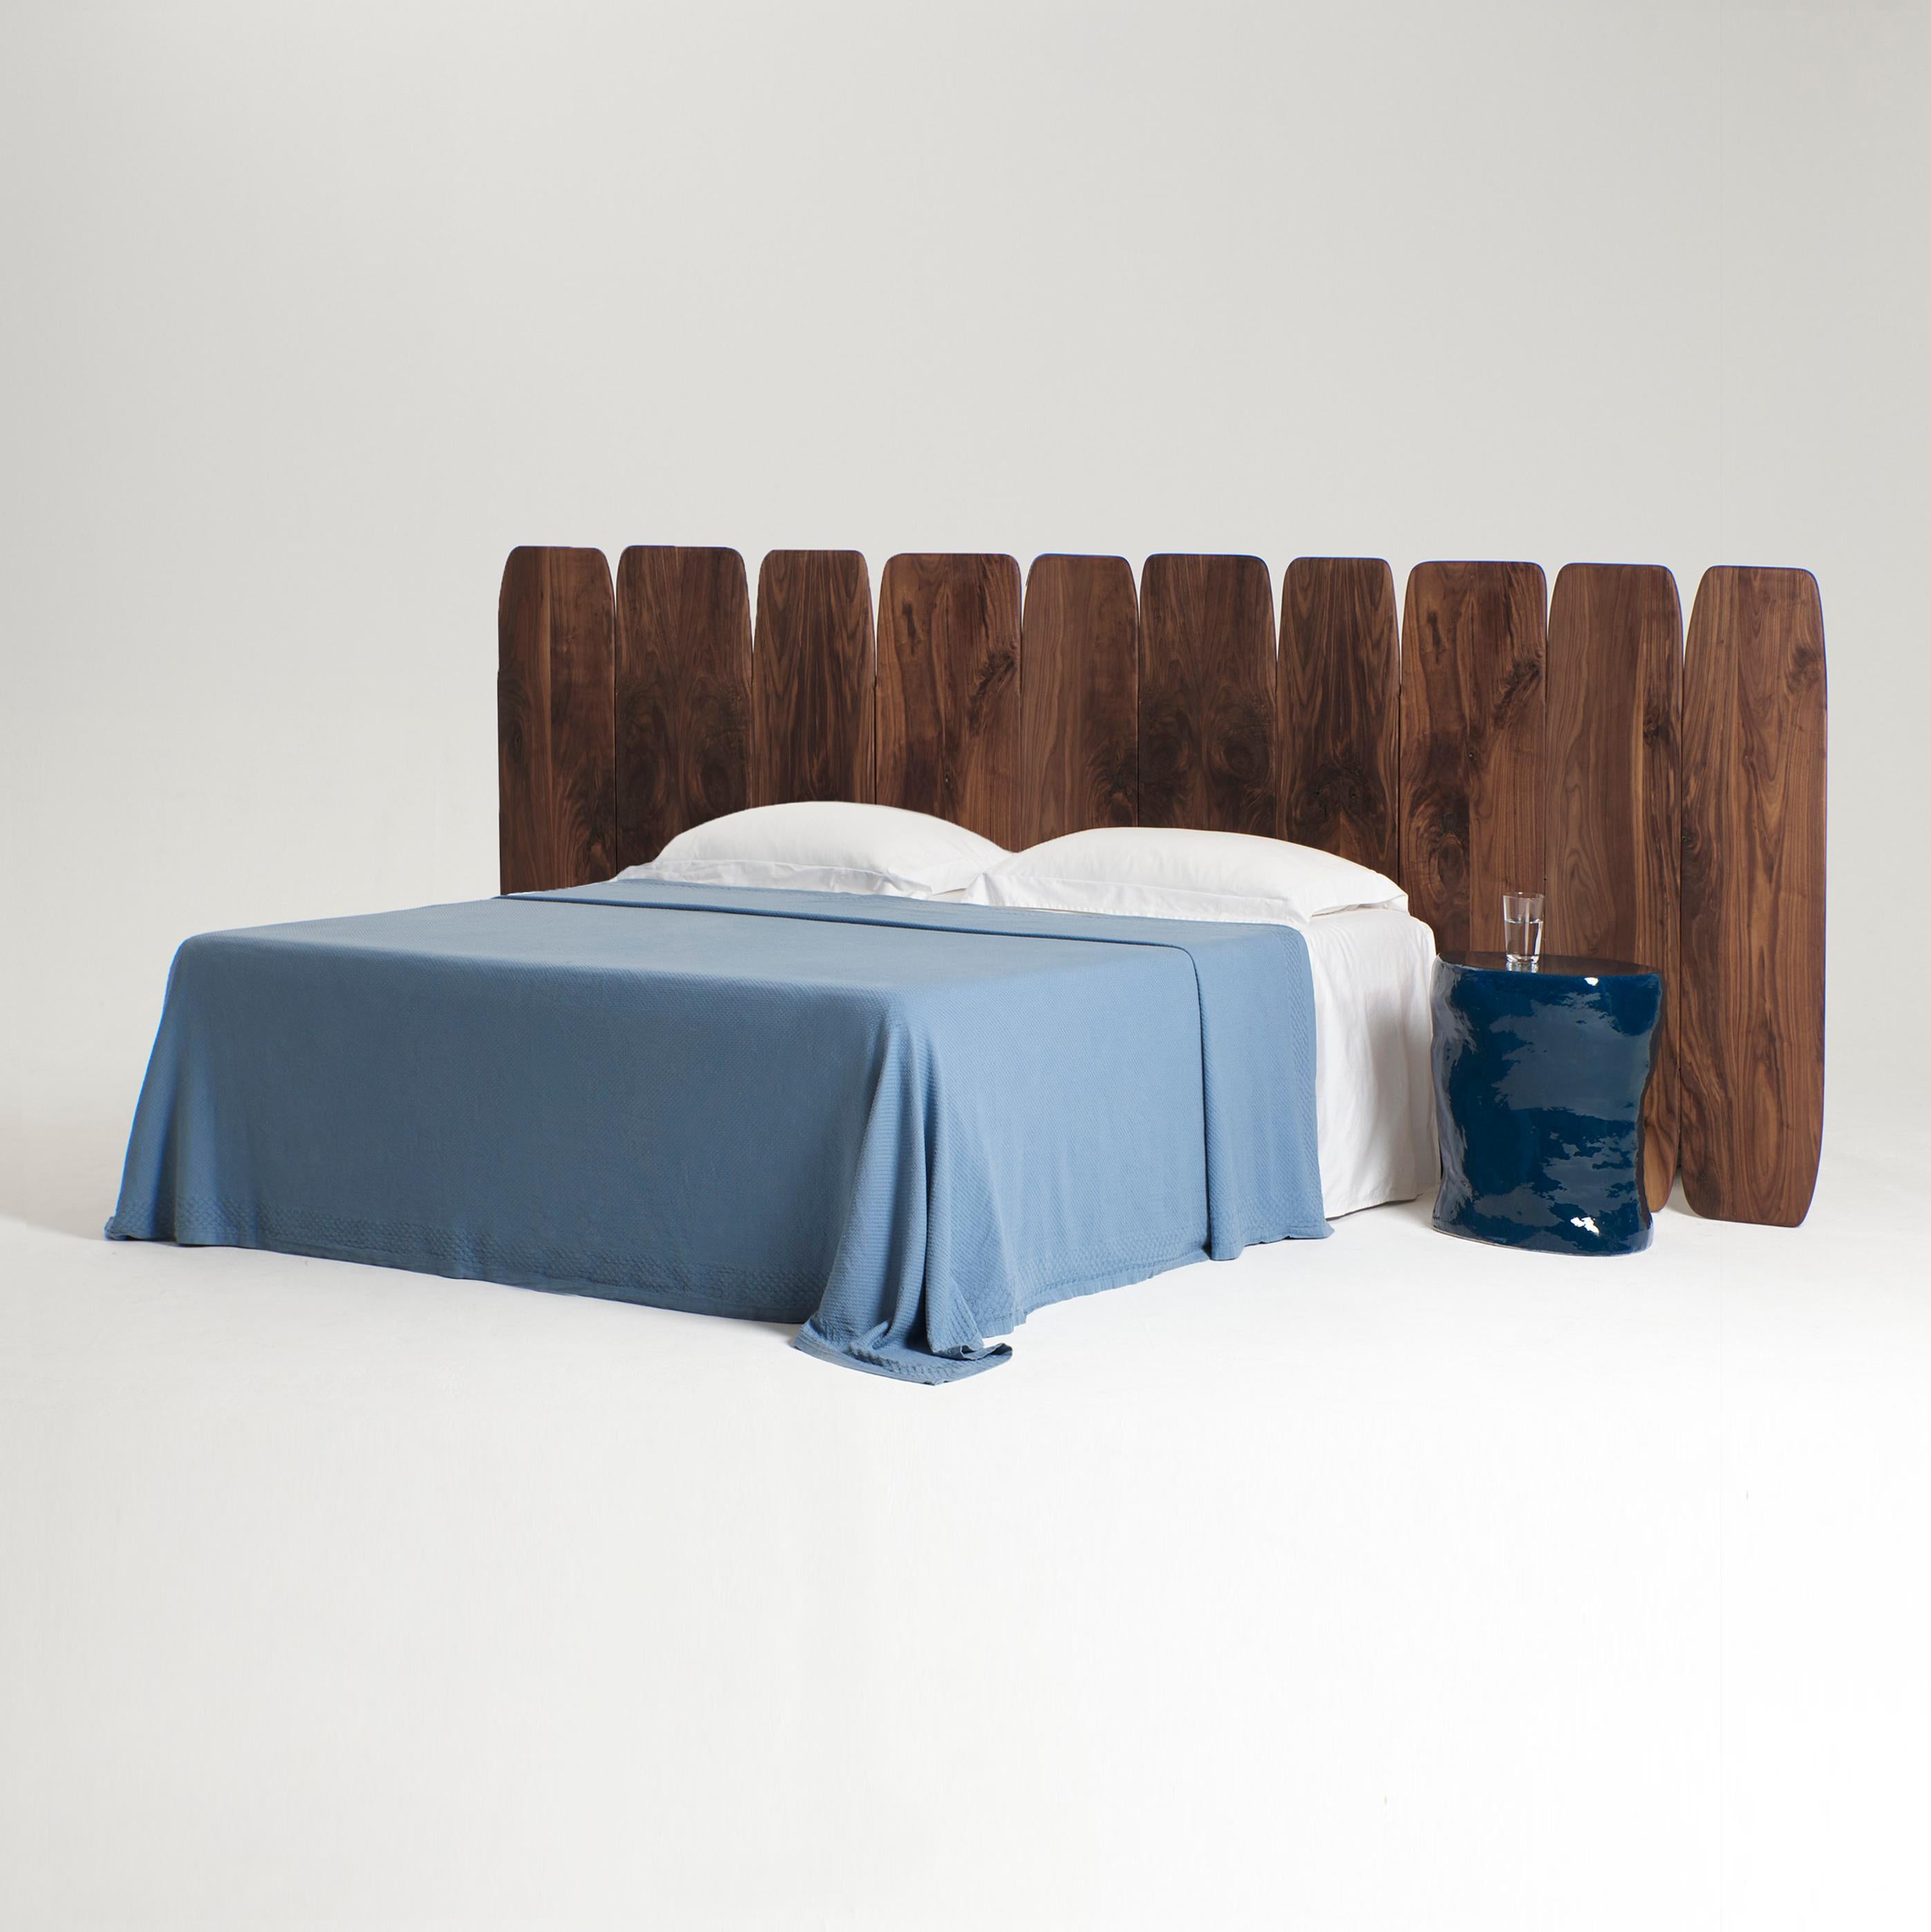 Madeira Headboard Large
Designed by Project 213A in 2023

Finest walnut wood panels made alined and wall-mounted to fit behind a kingsize bed..

Bespoke dimensions upon request, also available in oak and walnut.
Handmade in Portugal. 
Production